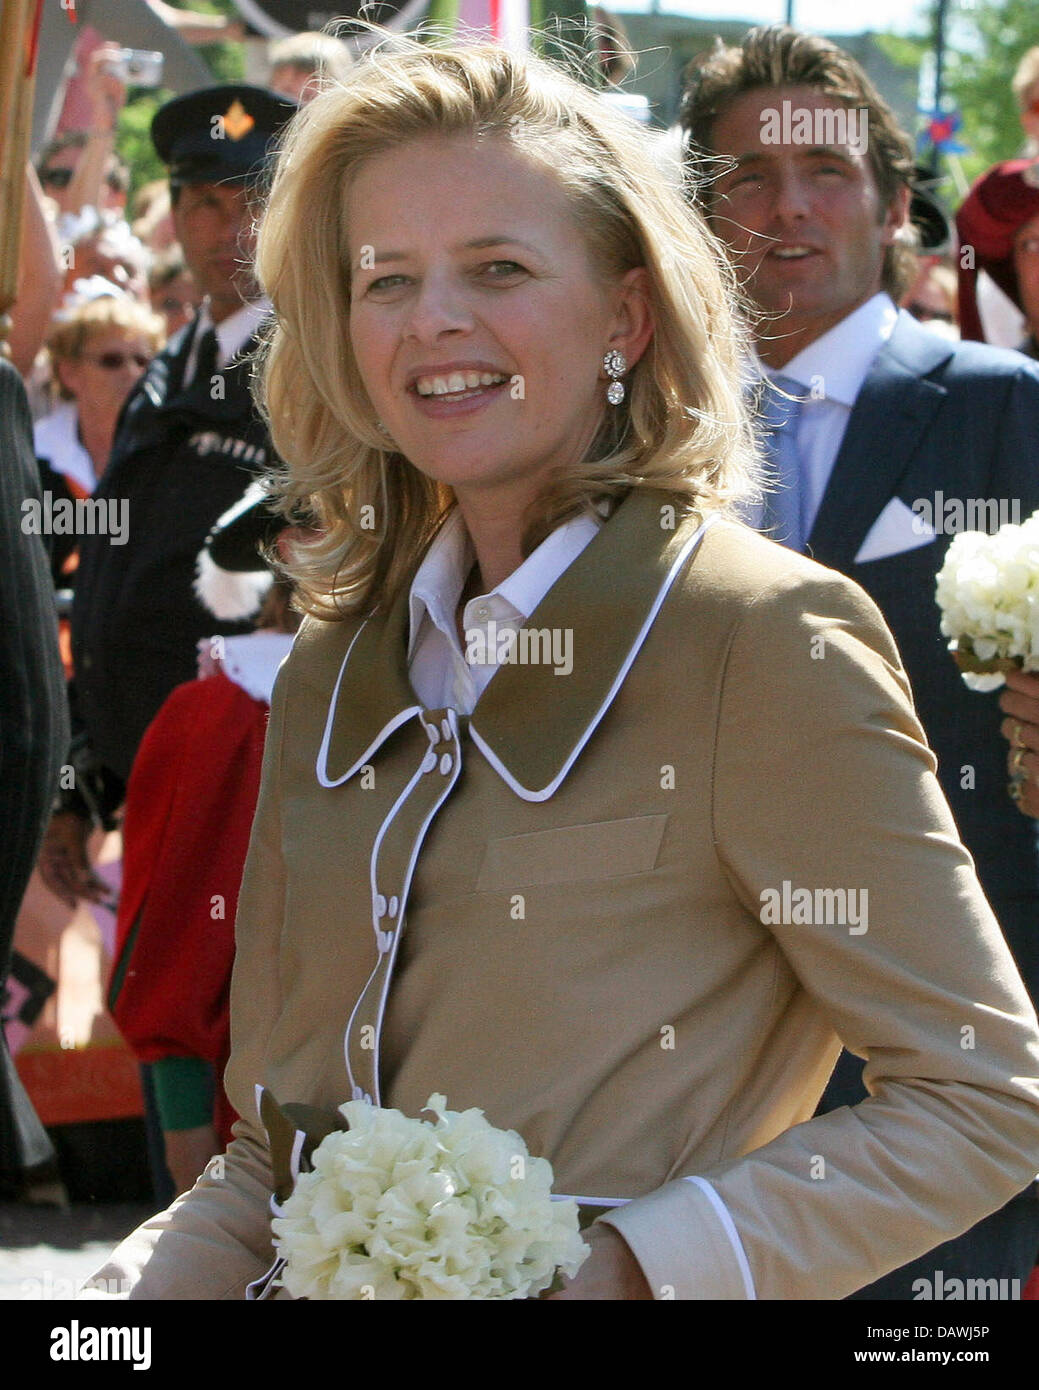 Dutch Princess Mabel smiles during her 'Queen's Day' visit to Den Bosch, Netherlands, Monday, 30 April 2007. Photo: Albert Nieboer (NETHERLANDS OUT) Stock Photo